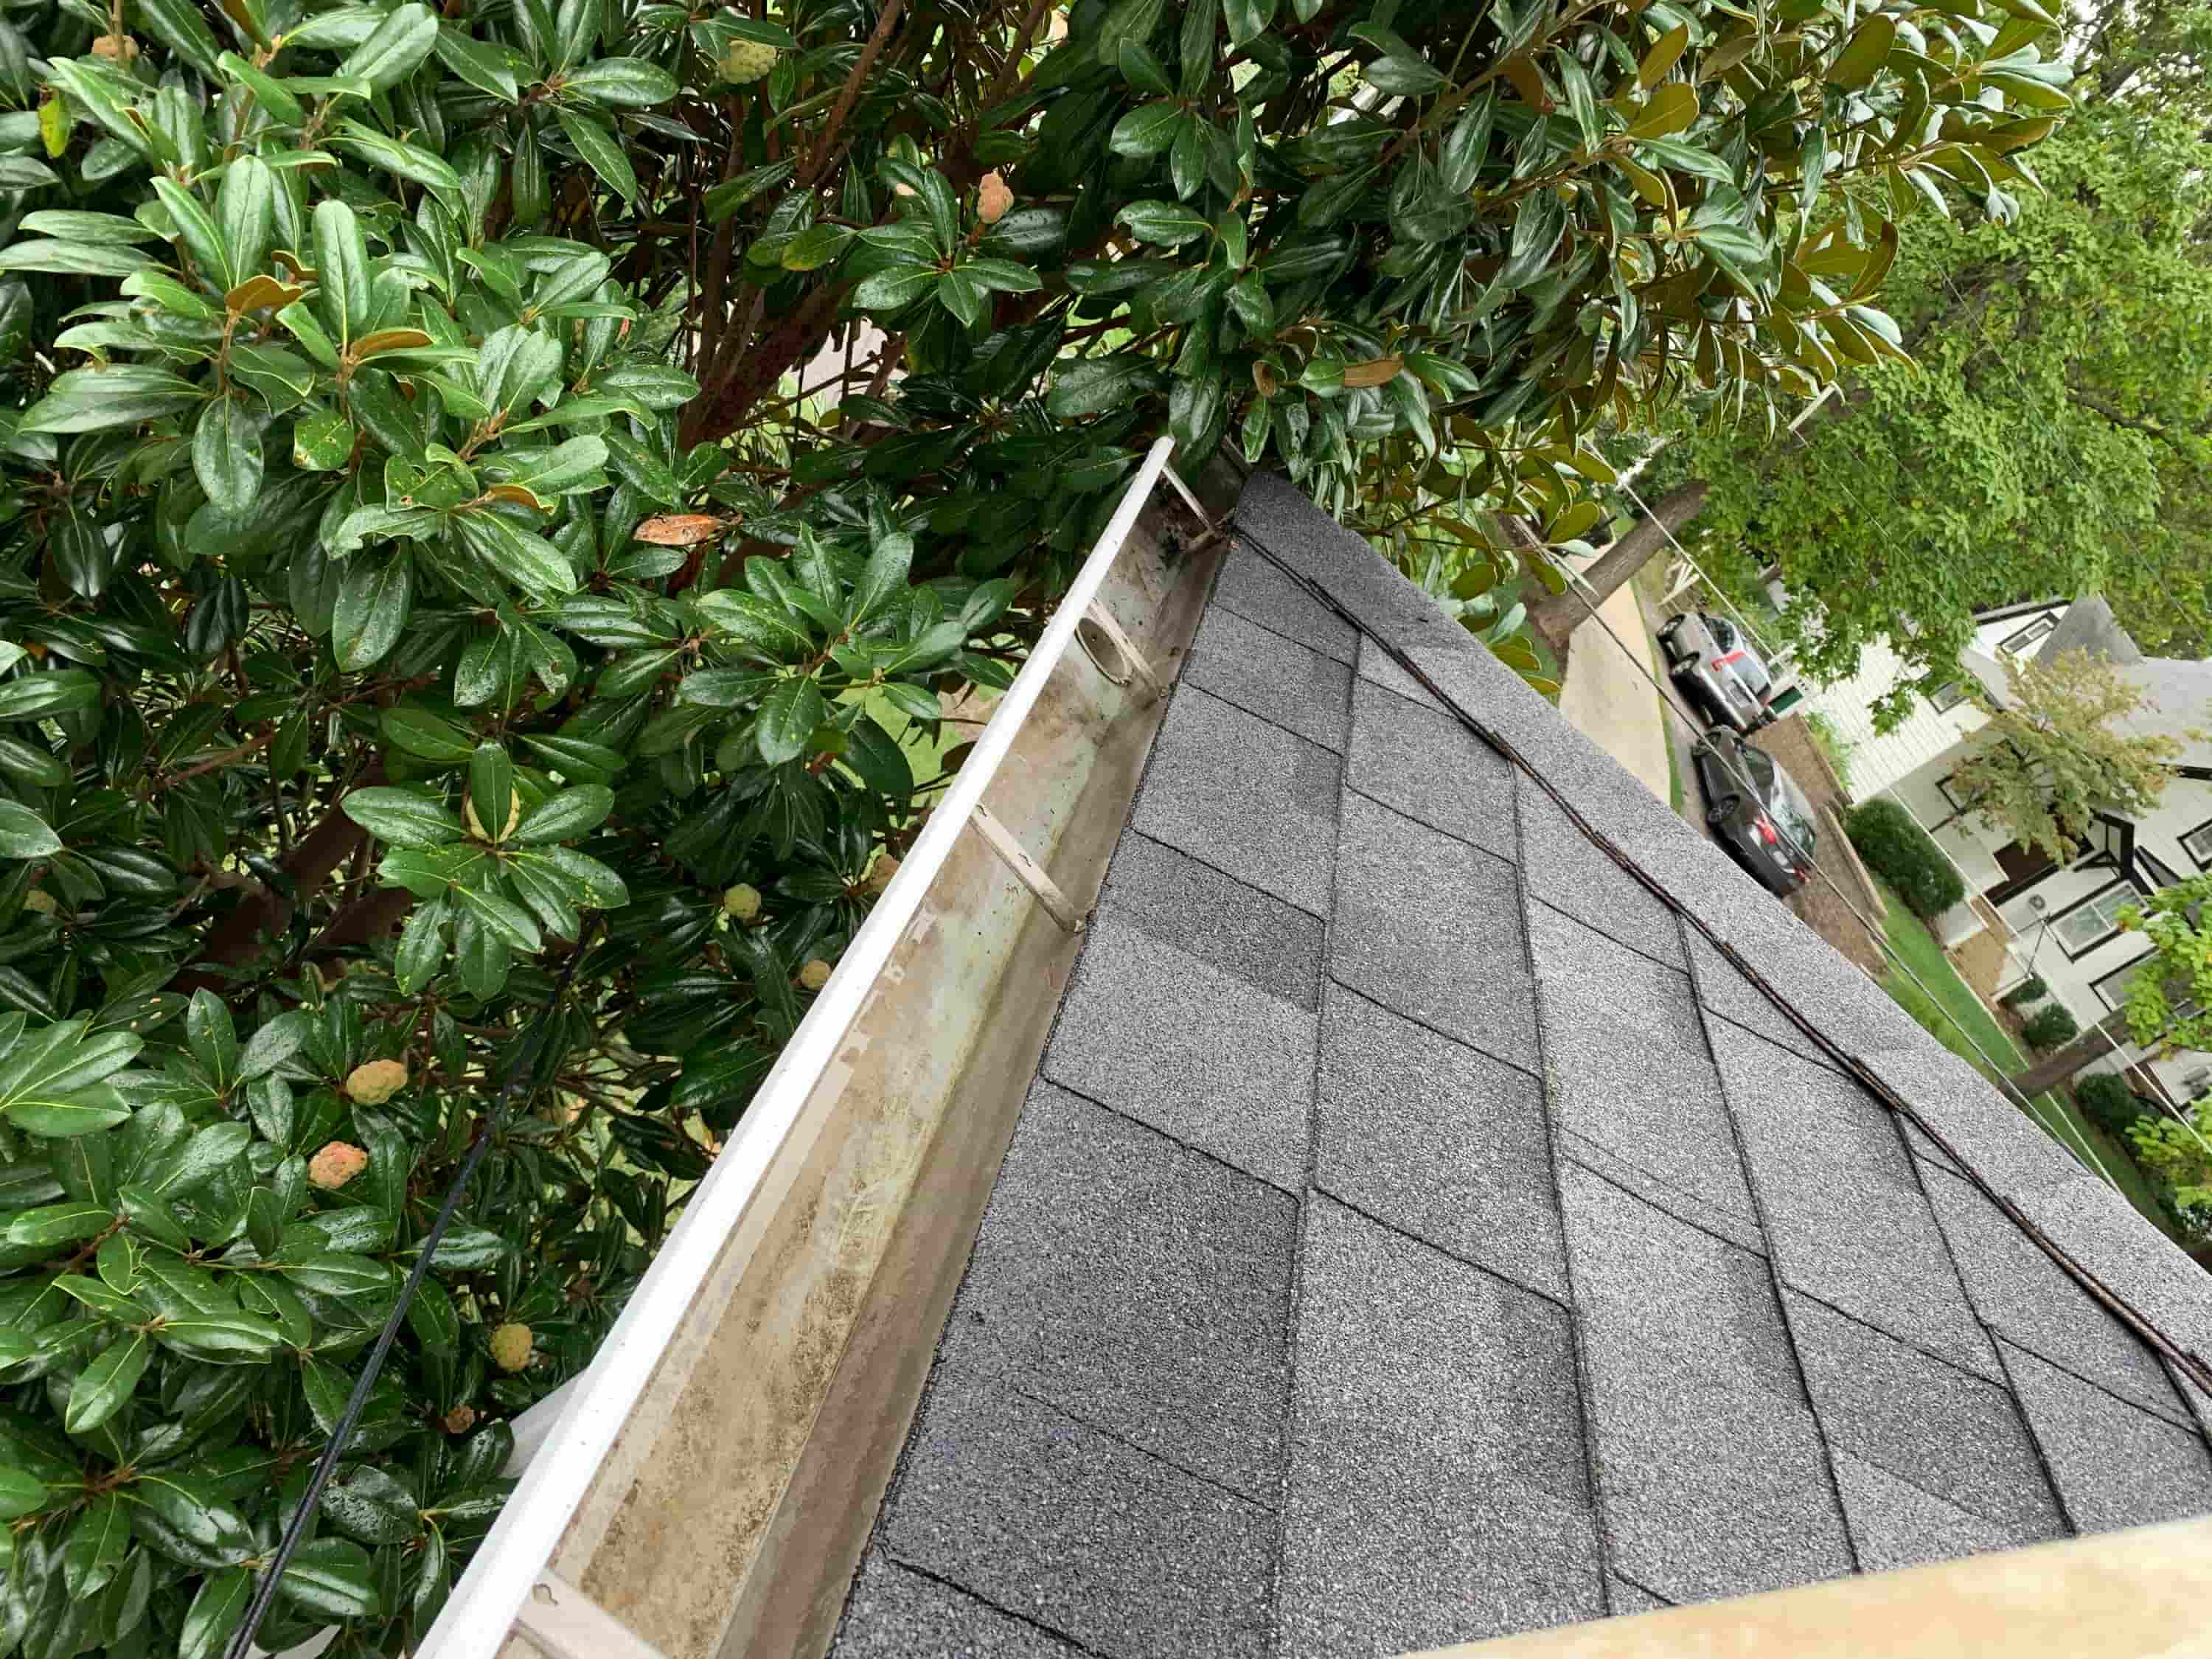 local gutter cleaning companies